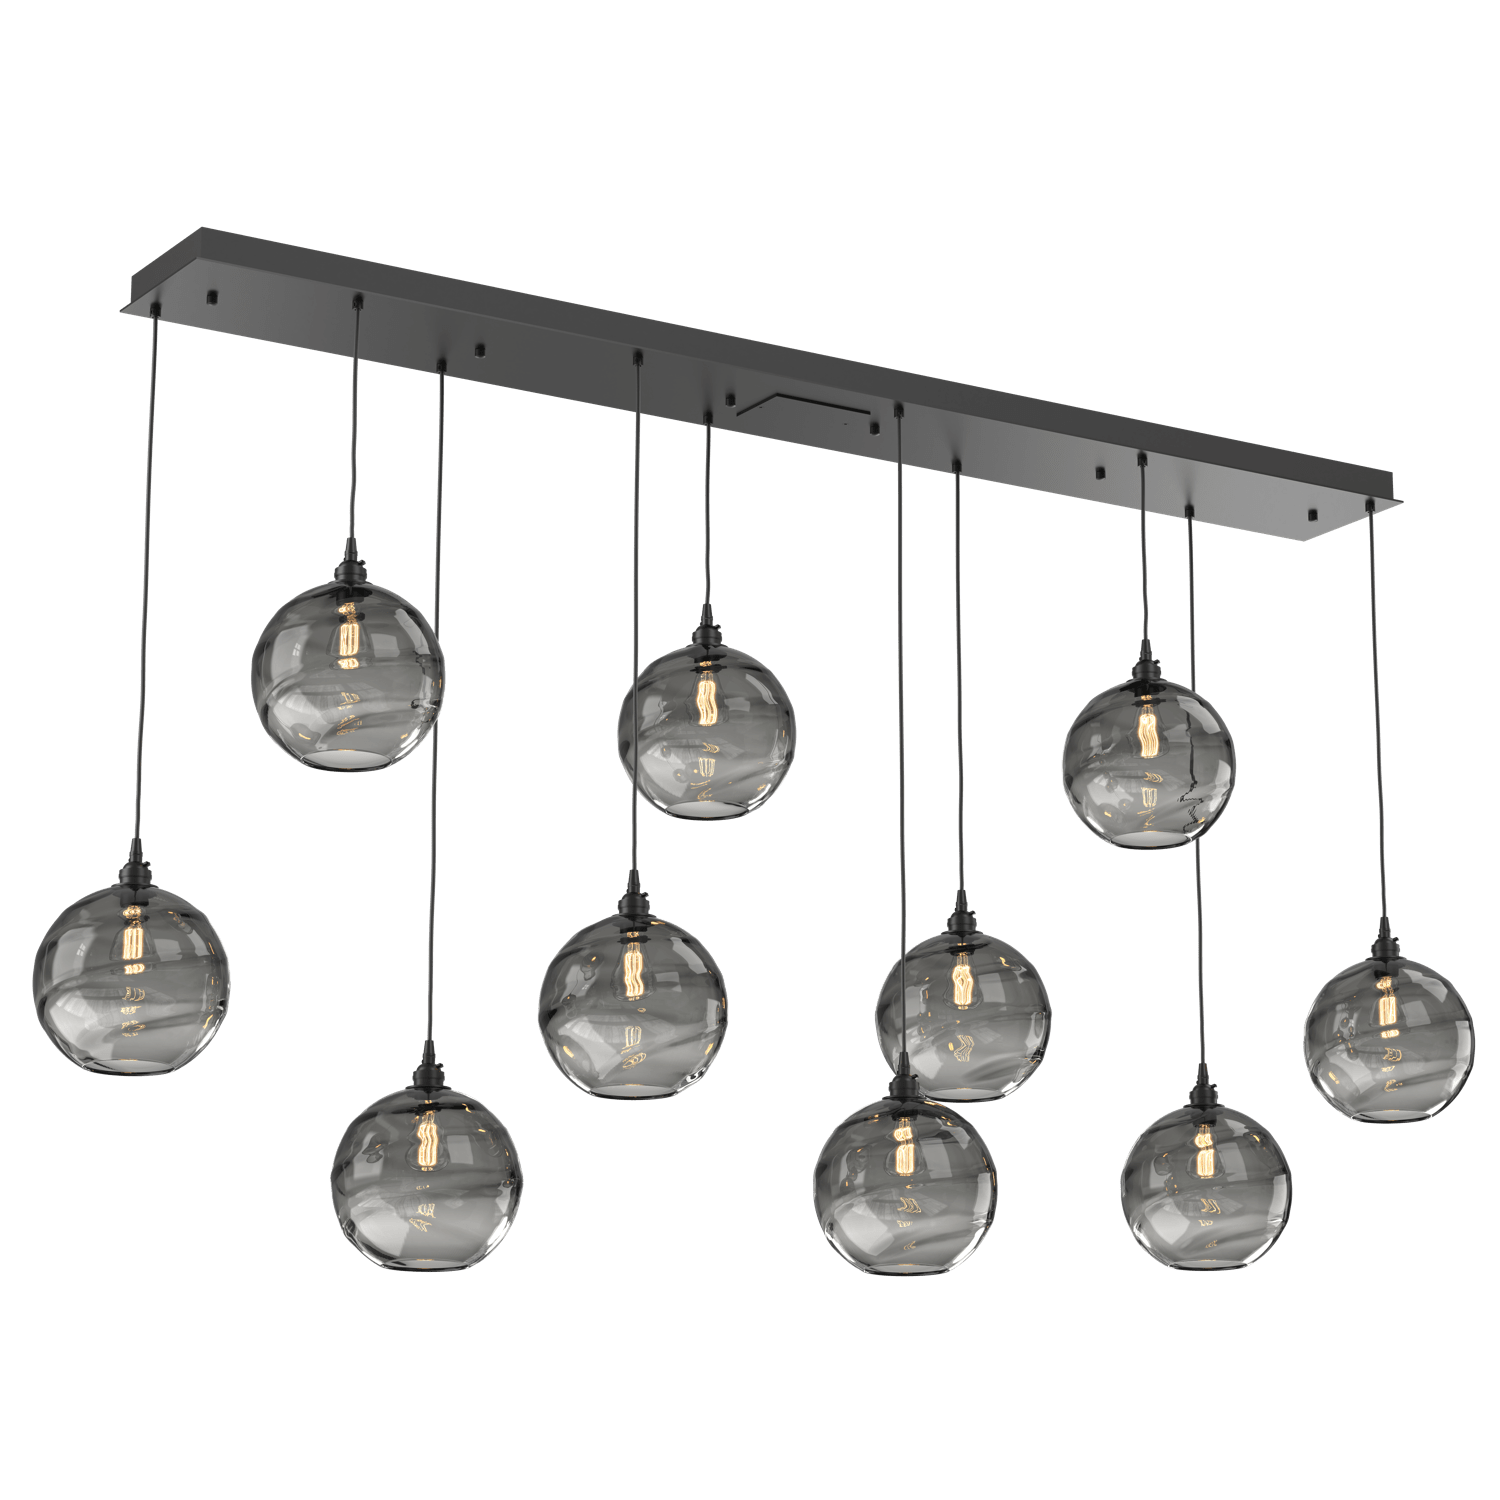 PLB0047-10-MB-OS-Hammerton-Studio-Optic-Blown-Glass-Terra-10-light-linear-pendant-chandelier-with-matte-black-finish-and-optic-smoke-blown-glass-shades-and-incandescent-lamping